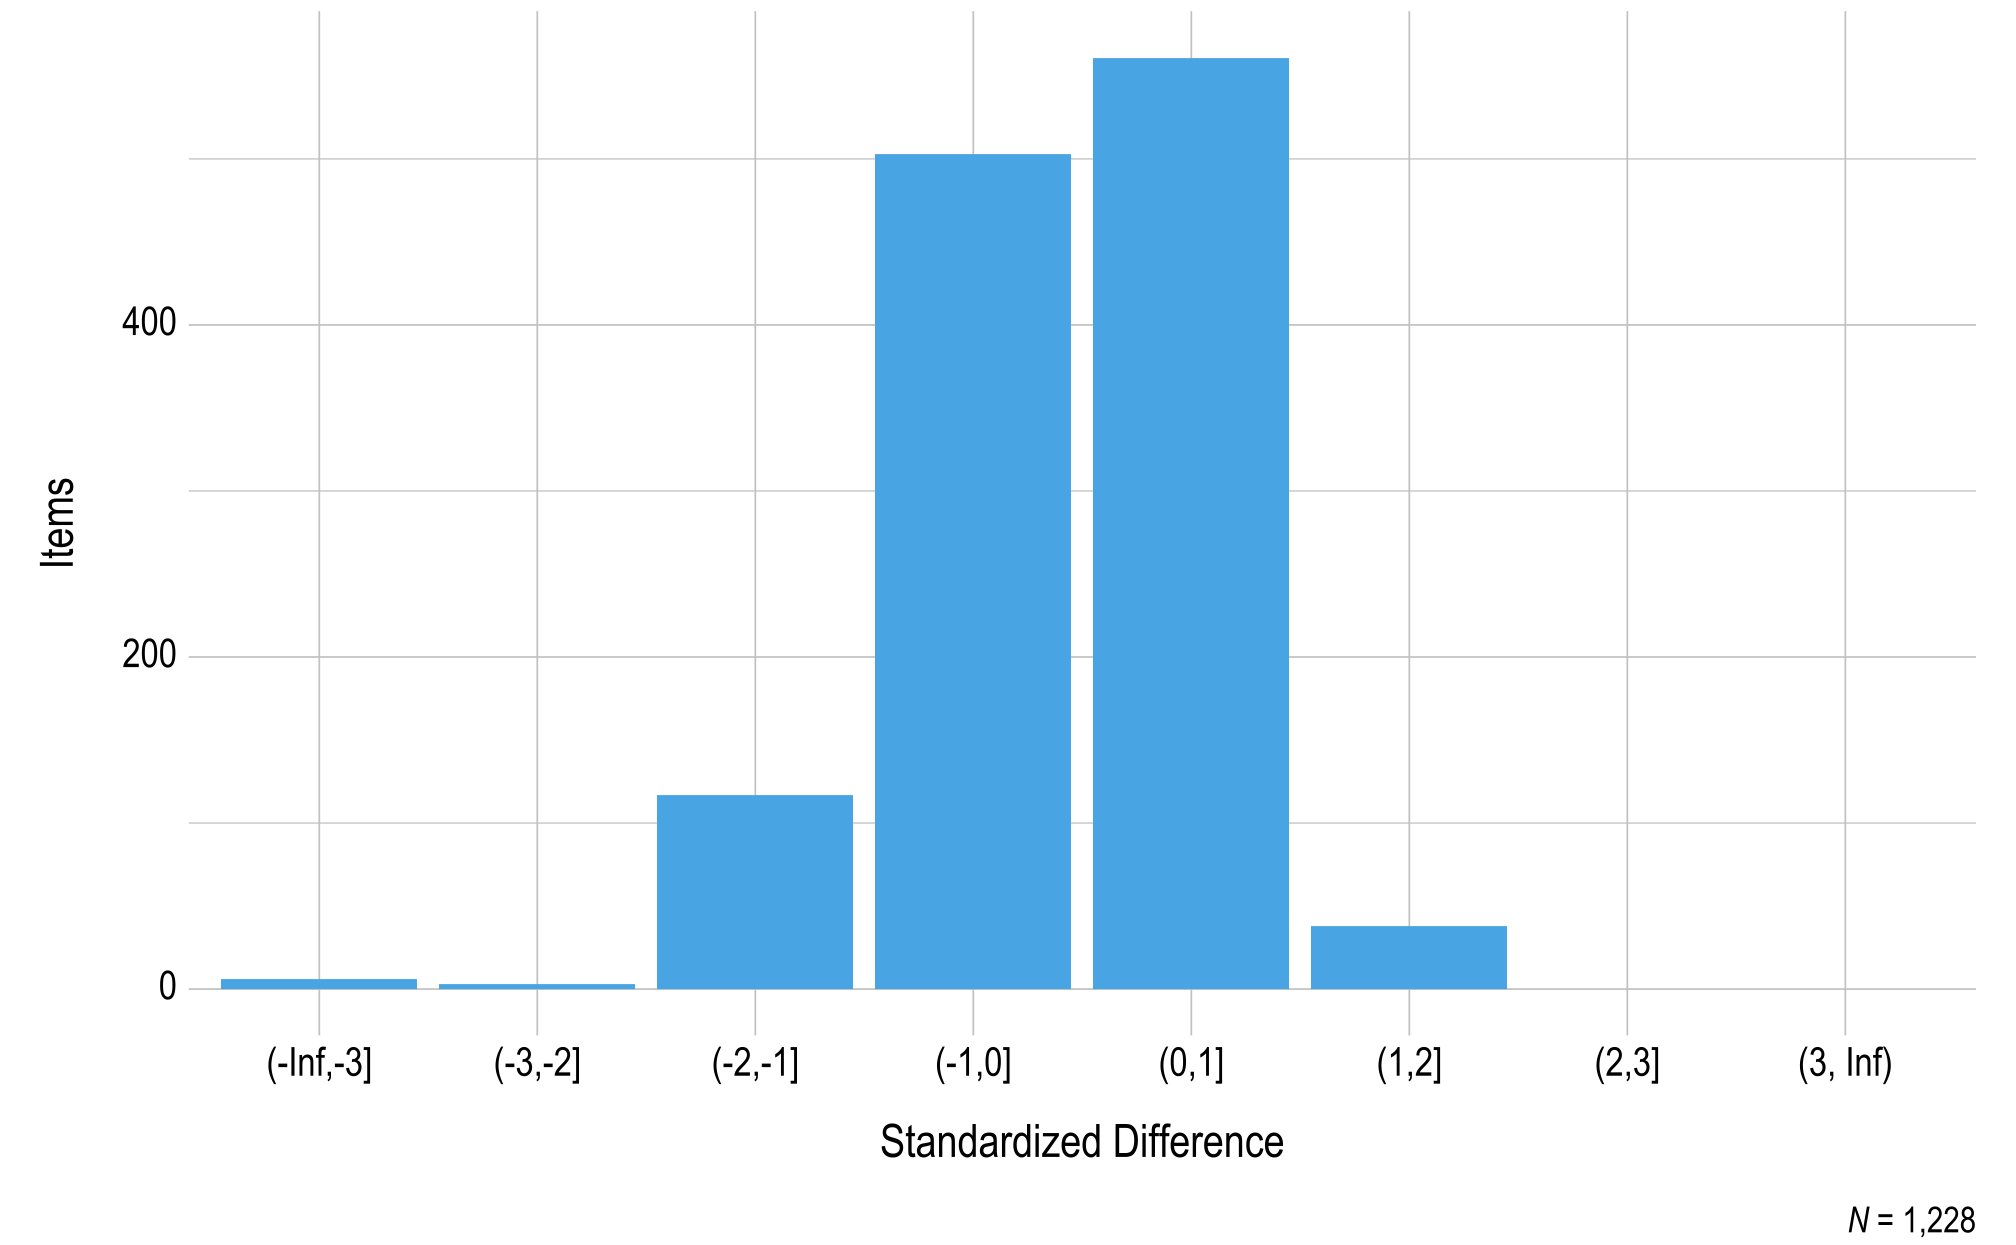 This figure contains a histogram displaying standardized difference on the x-axis and the number of science field test items on the y-axis.